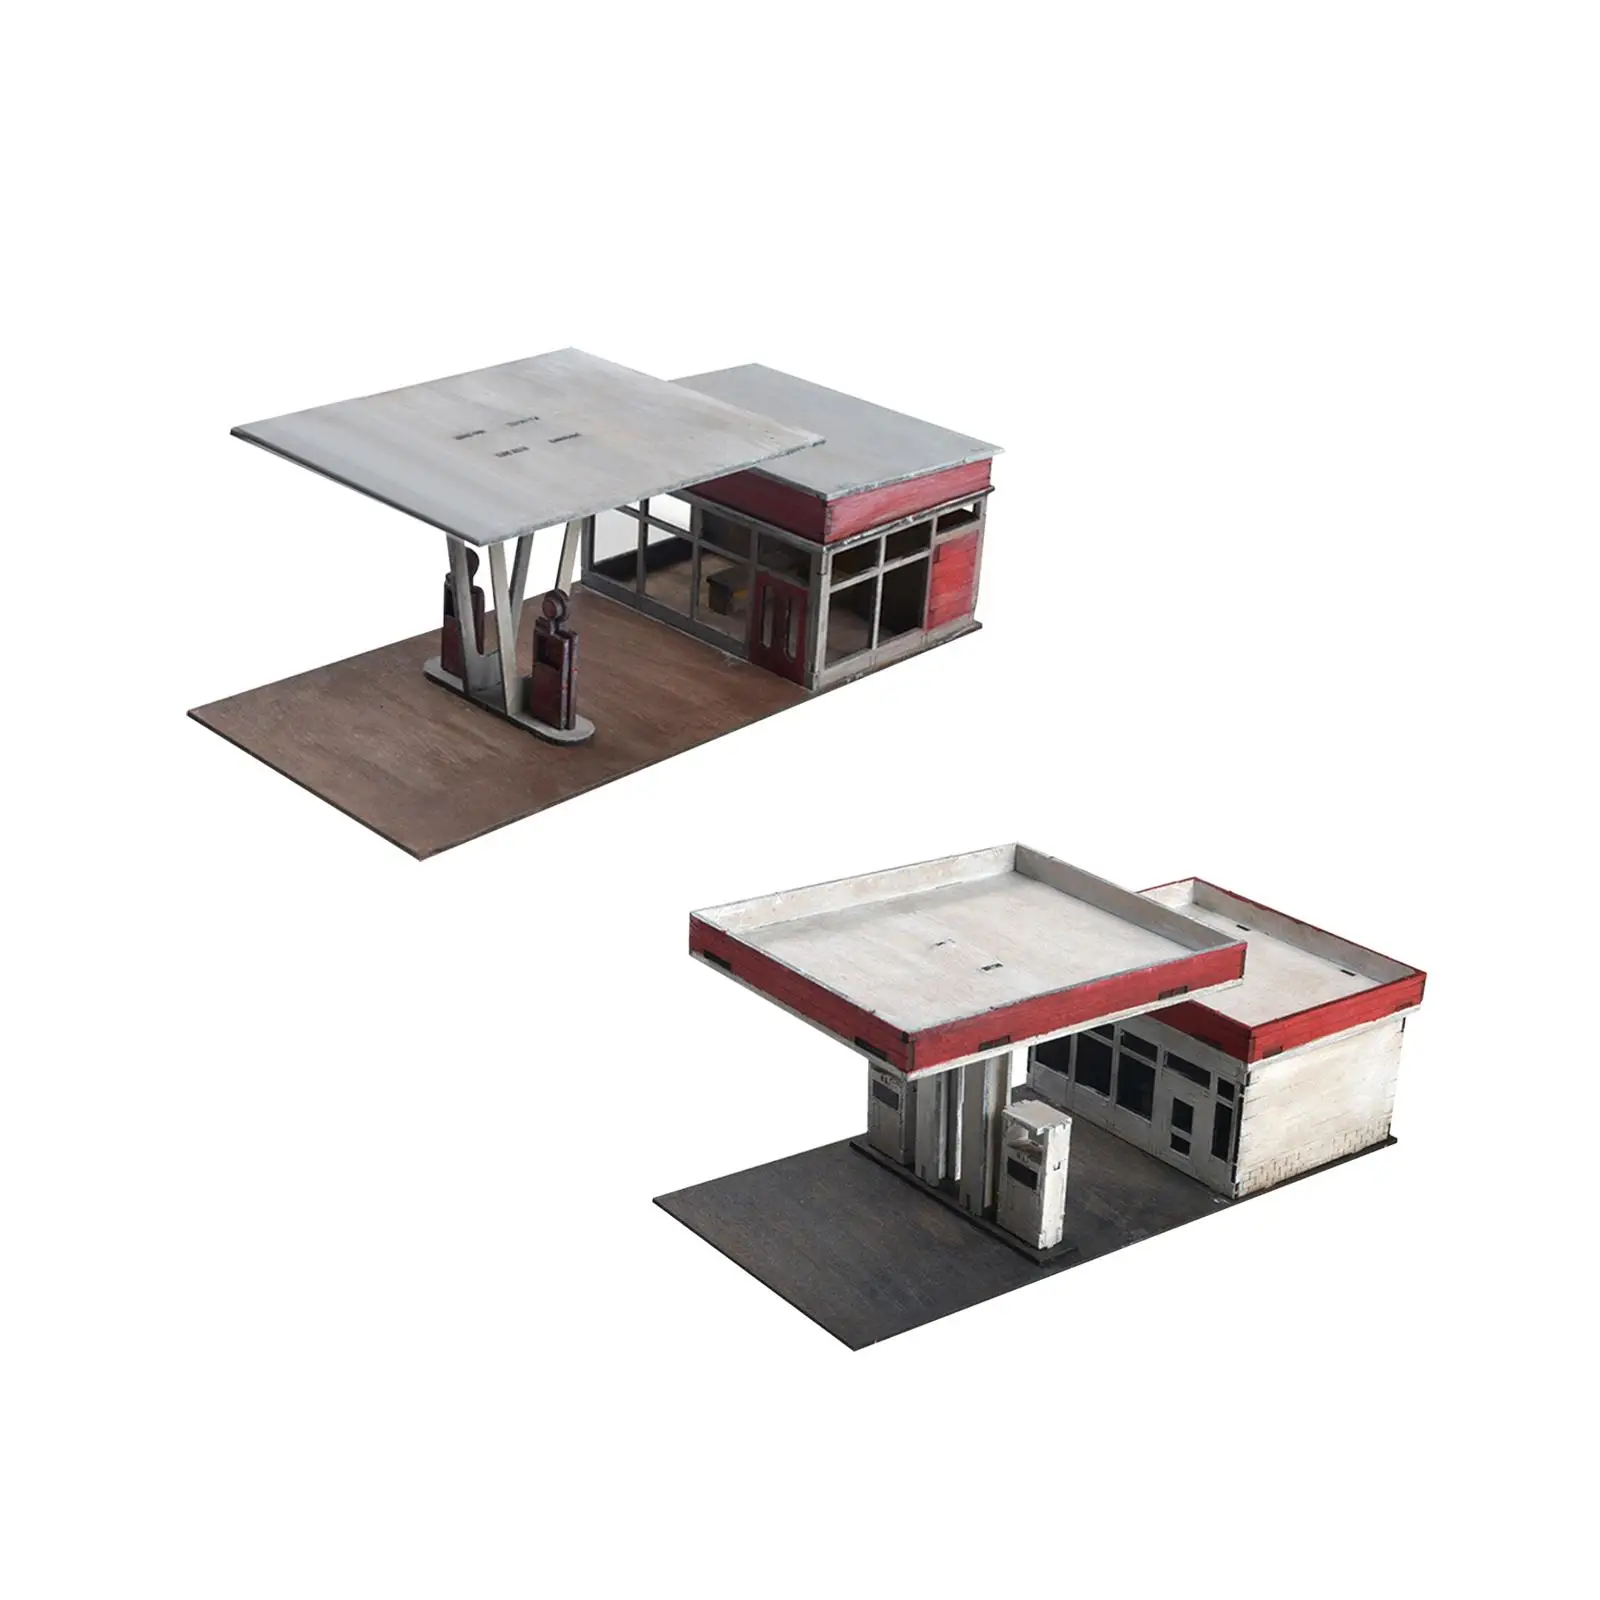 1:72 1:64 Handmade Miniature House Innteractive 3D Puzzles Gas Station Architecture Scene for Architecture Model Model Railway